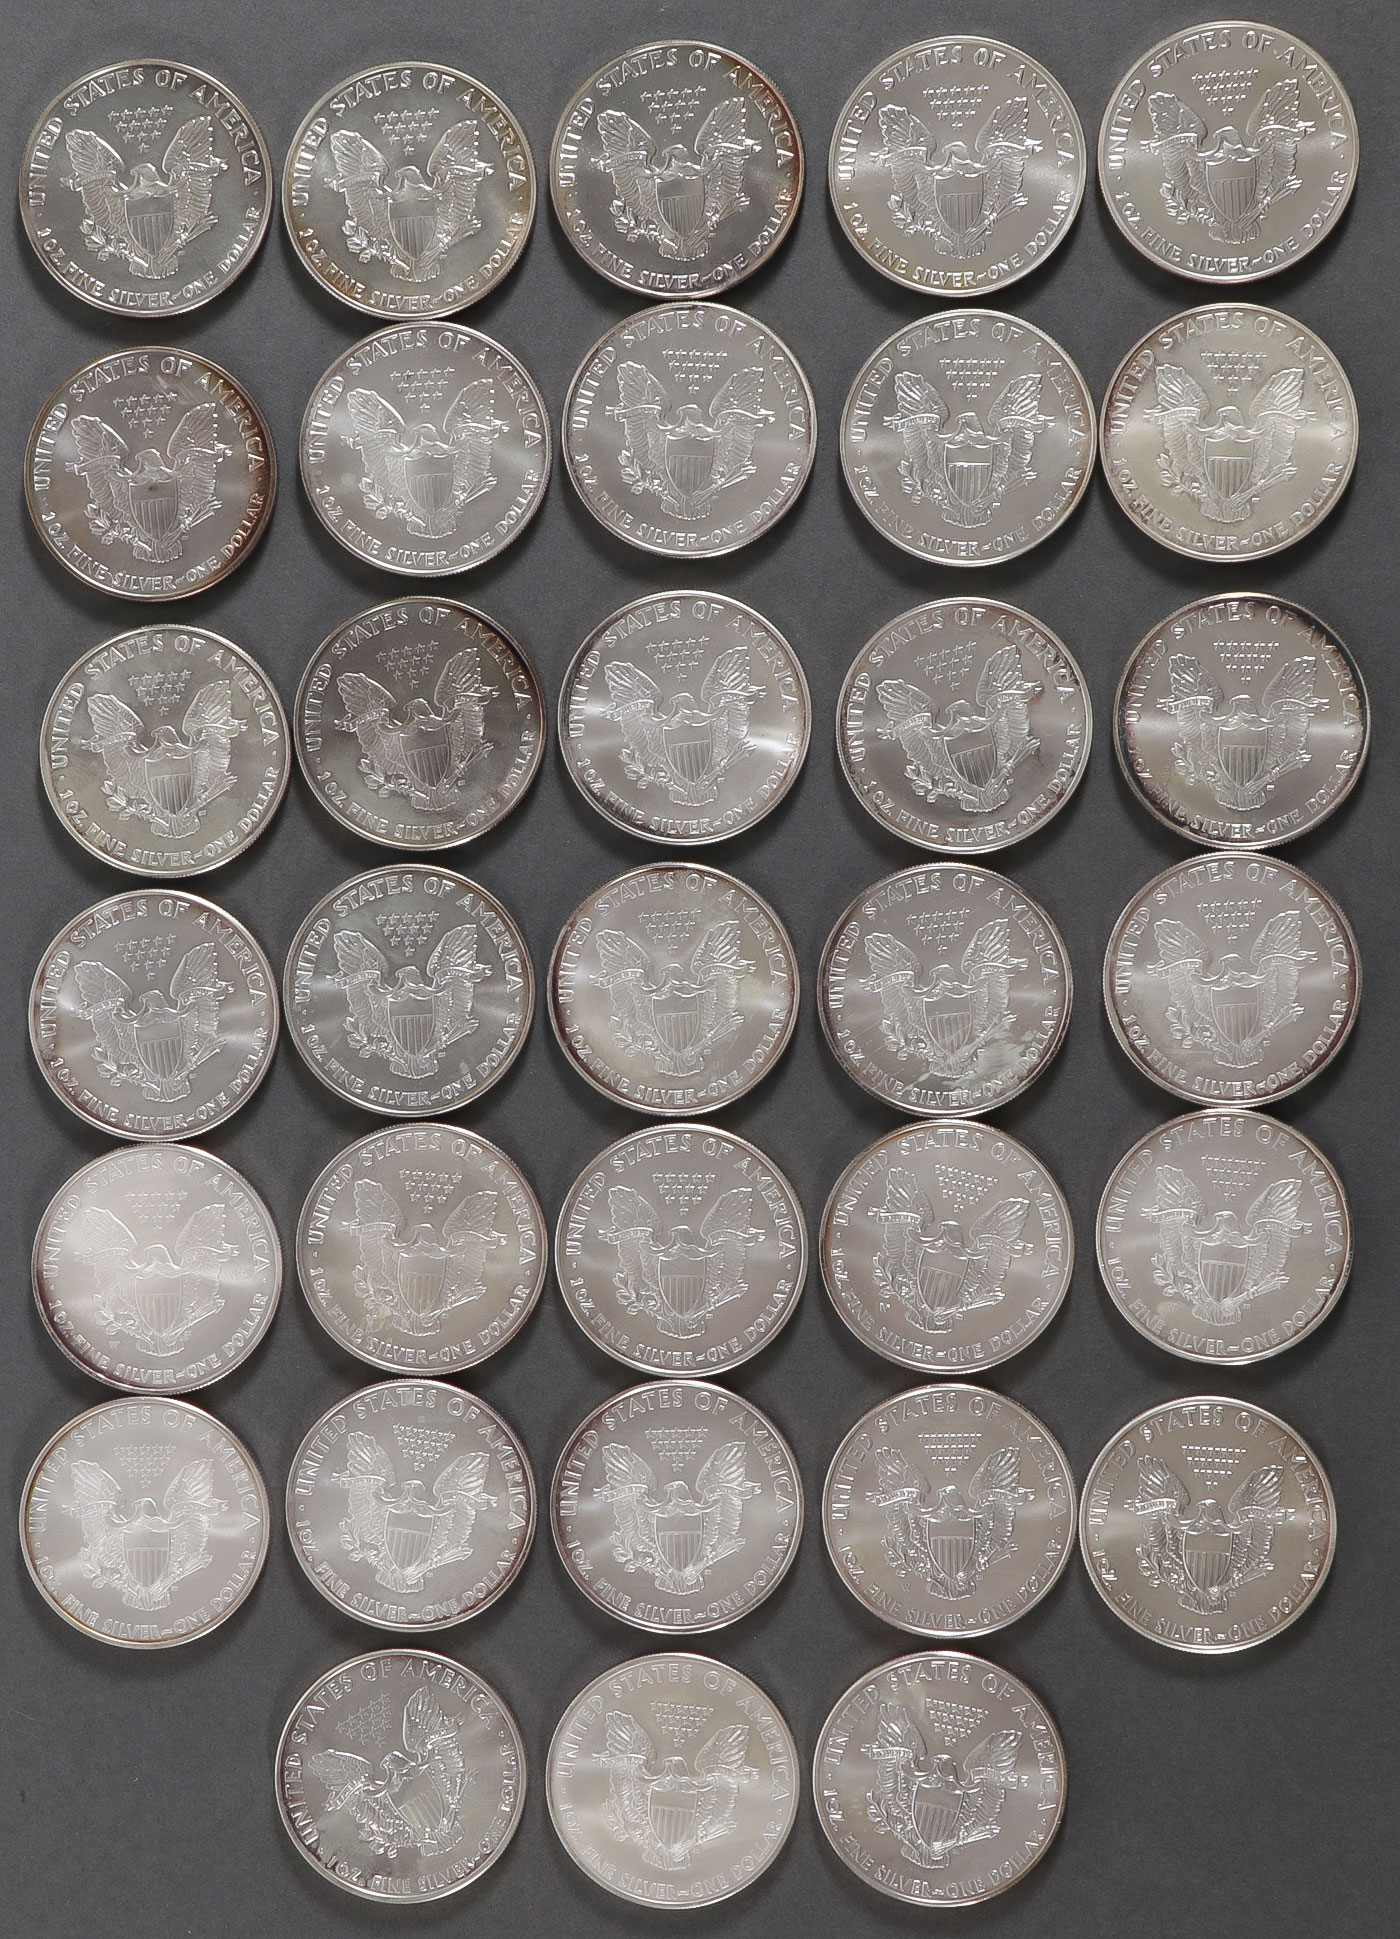 33 AMERICAN EAGLE SILVER DOLLARS - Image 2 of 2